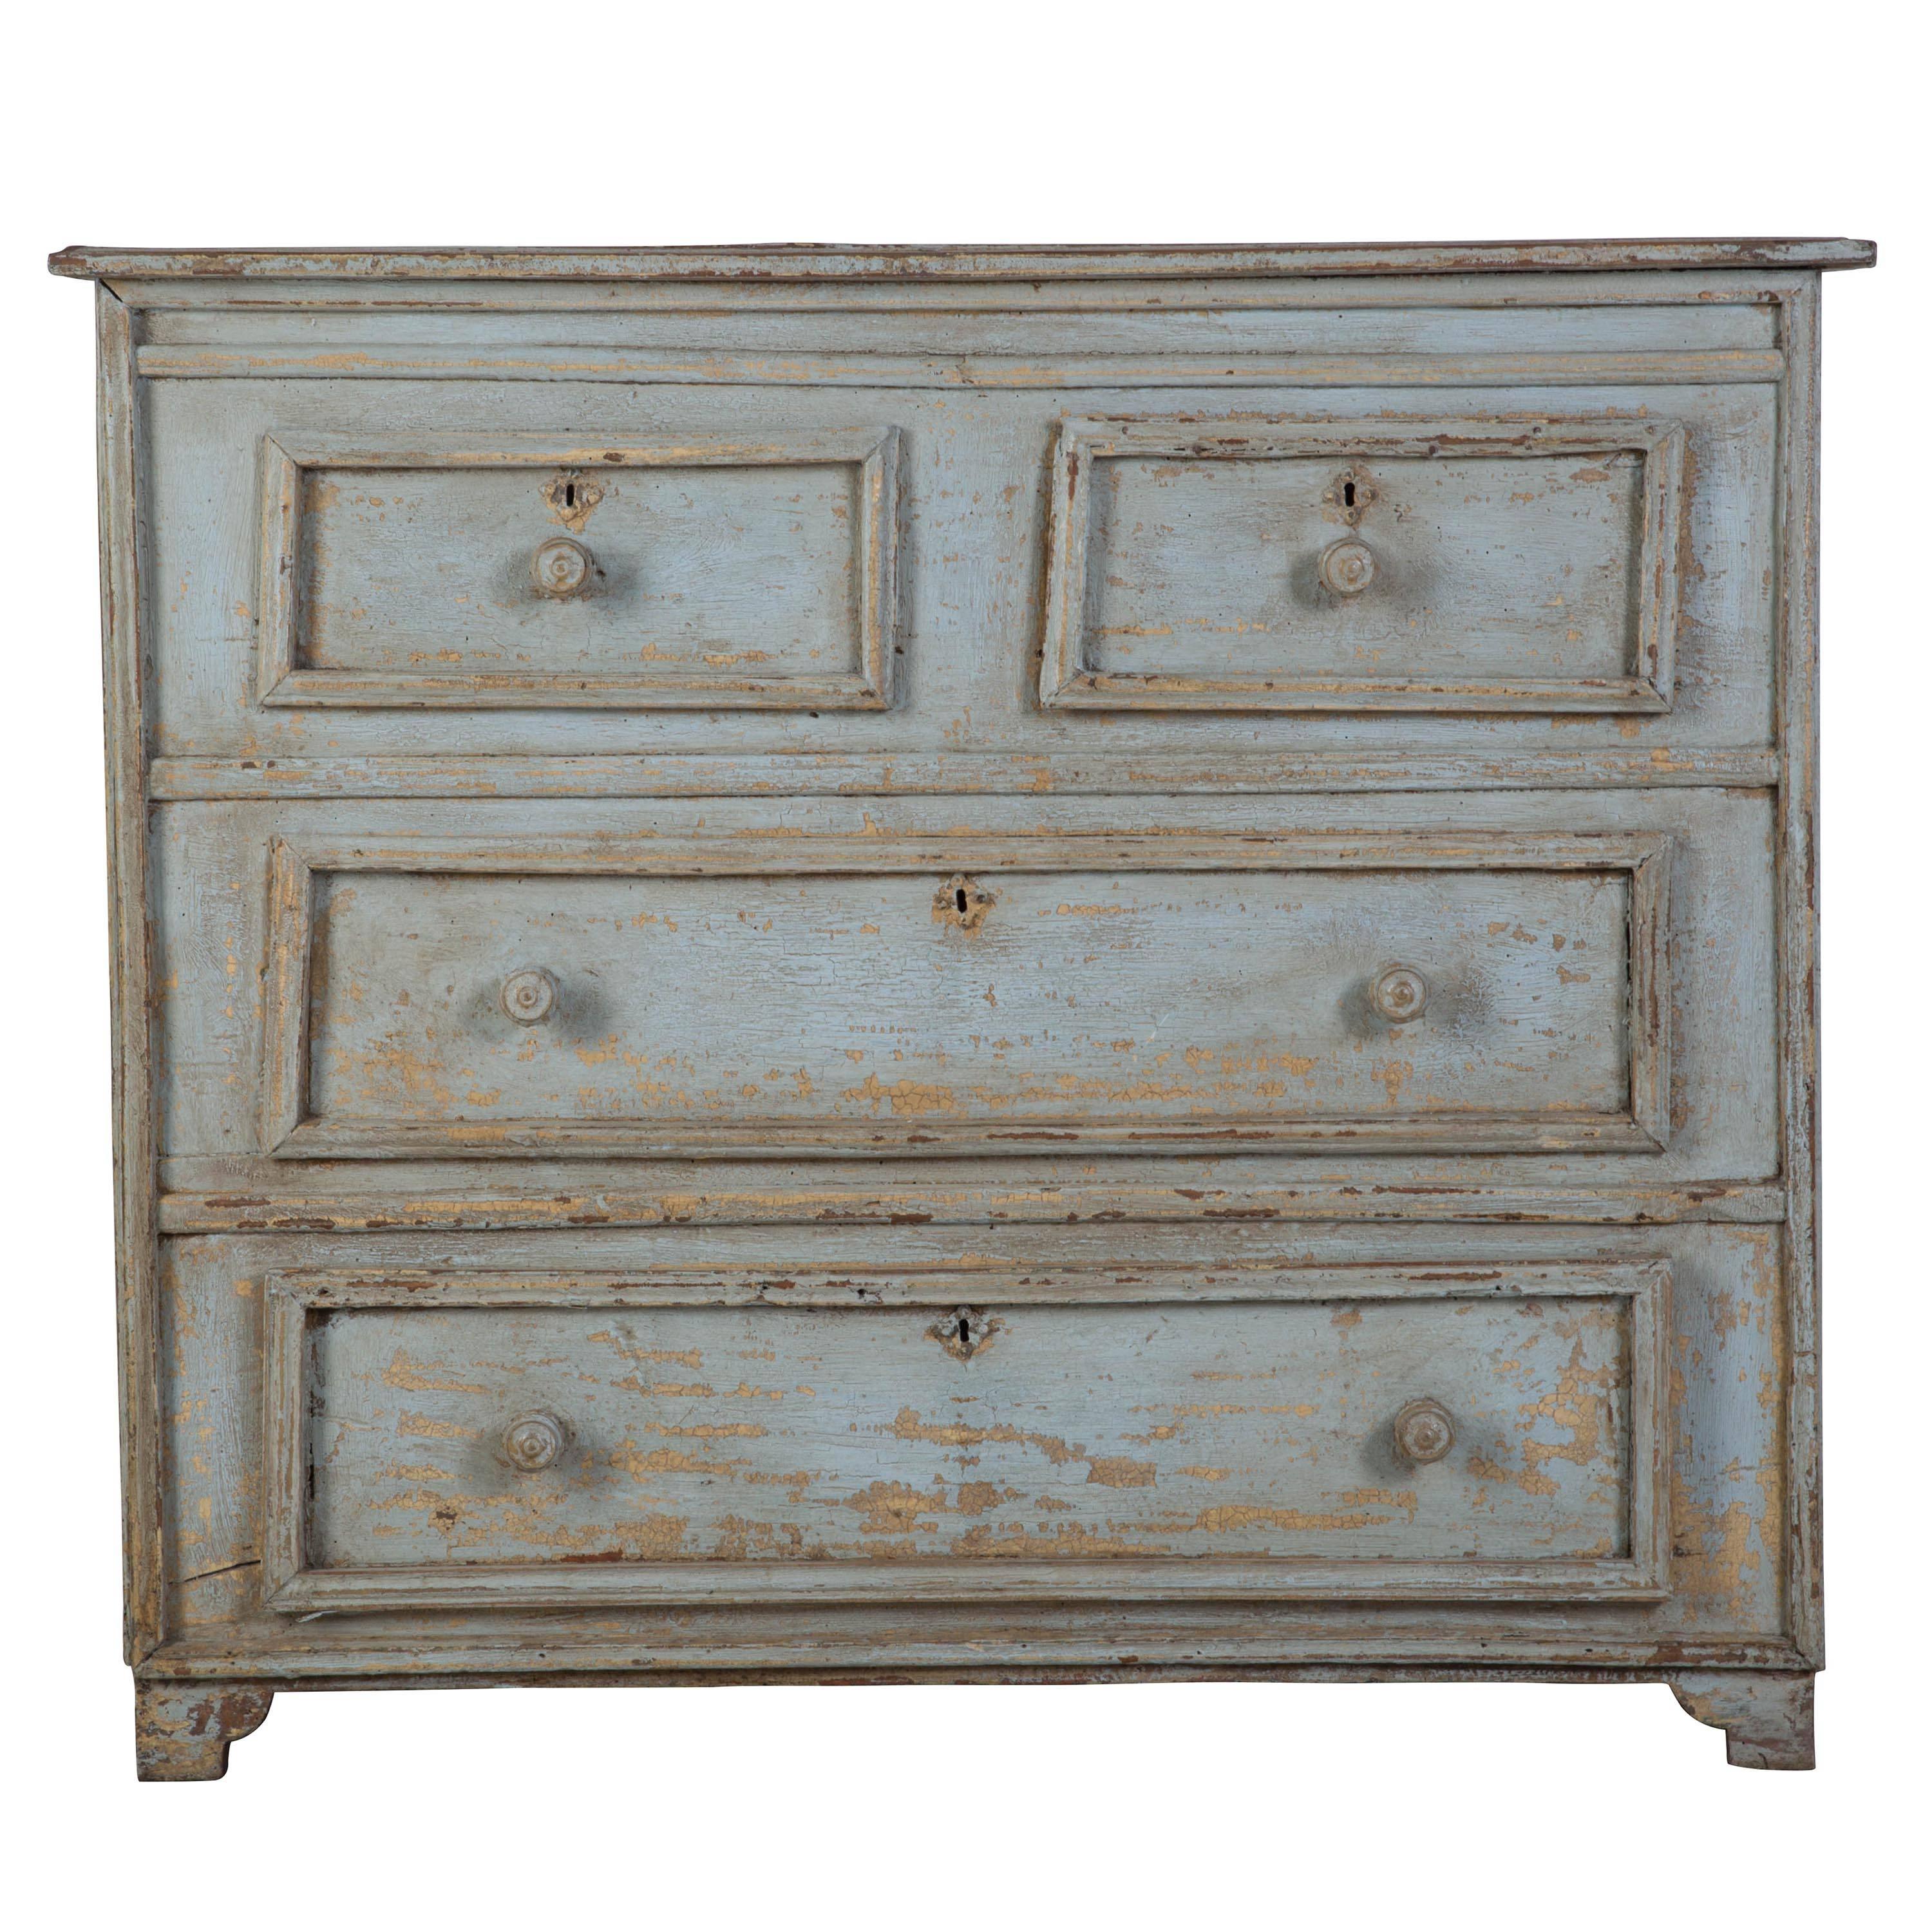 Early 19th Century Painted Chest